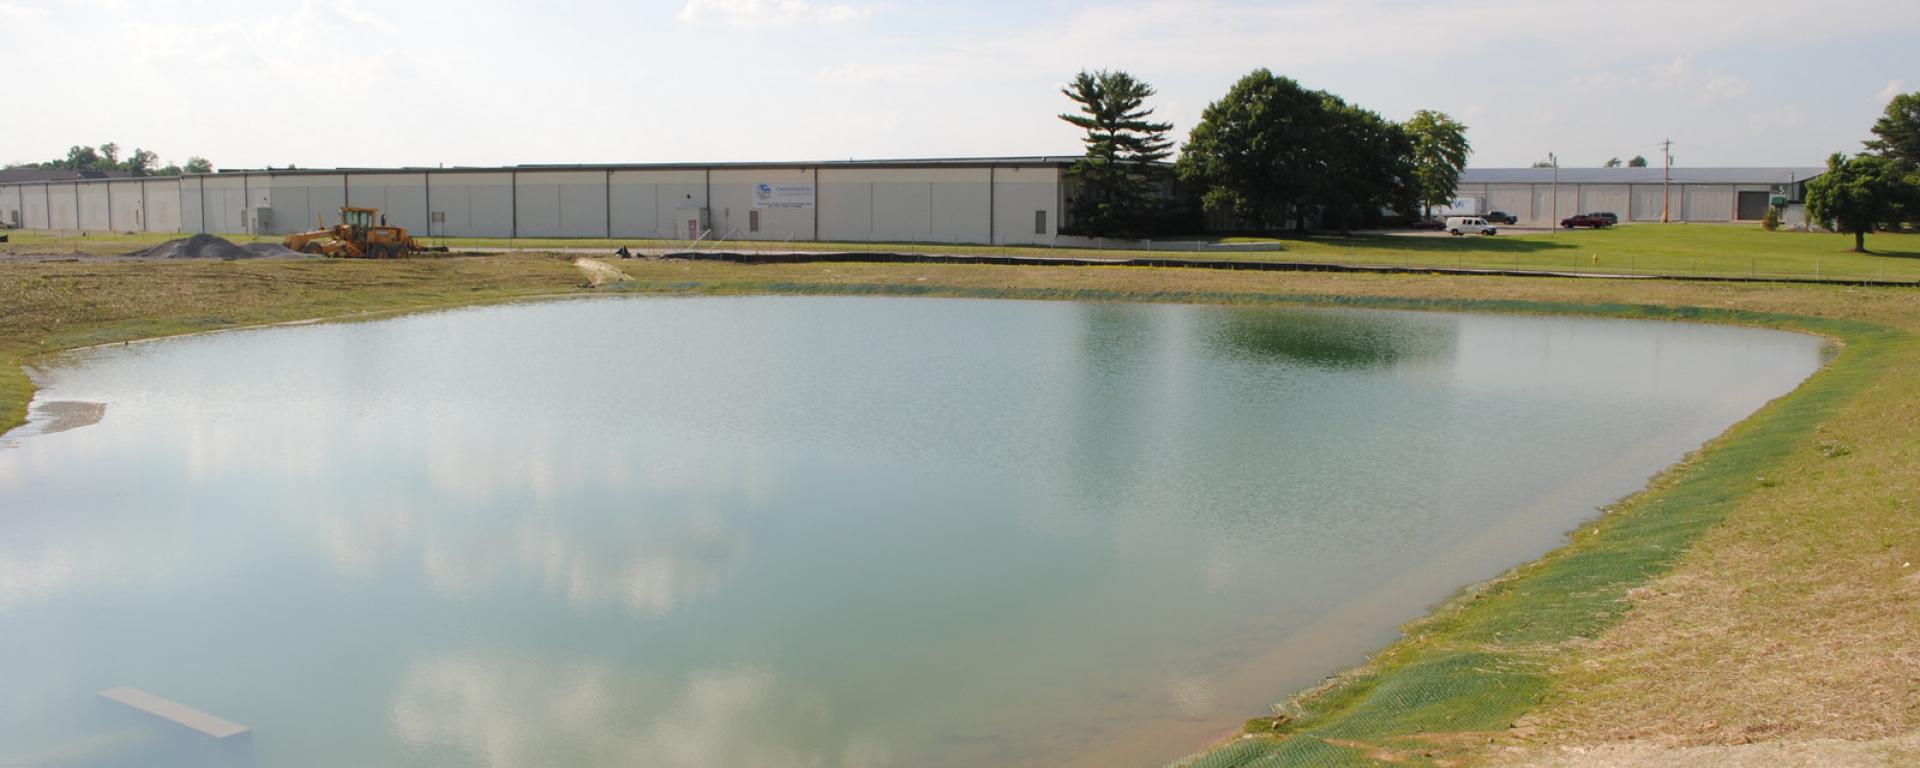 pond located behind the building